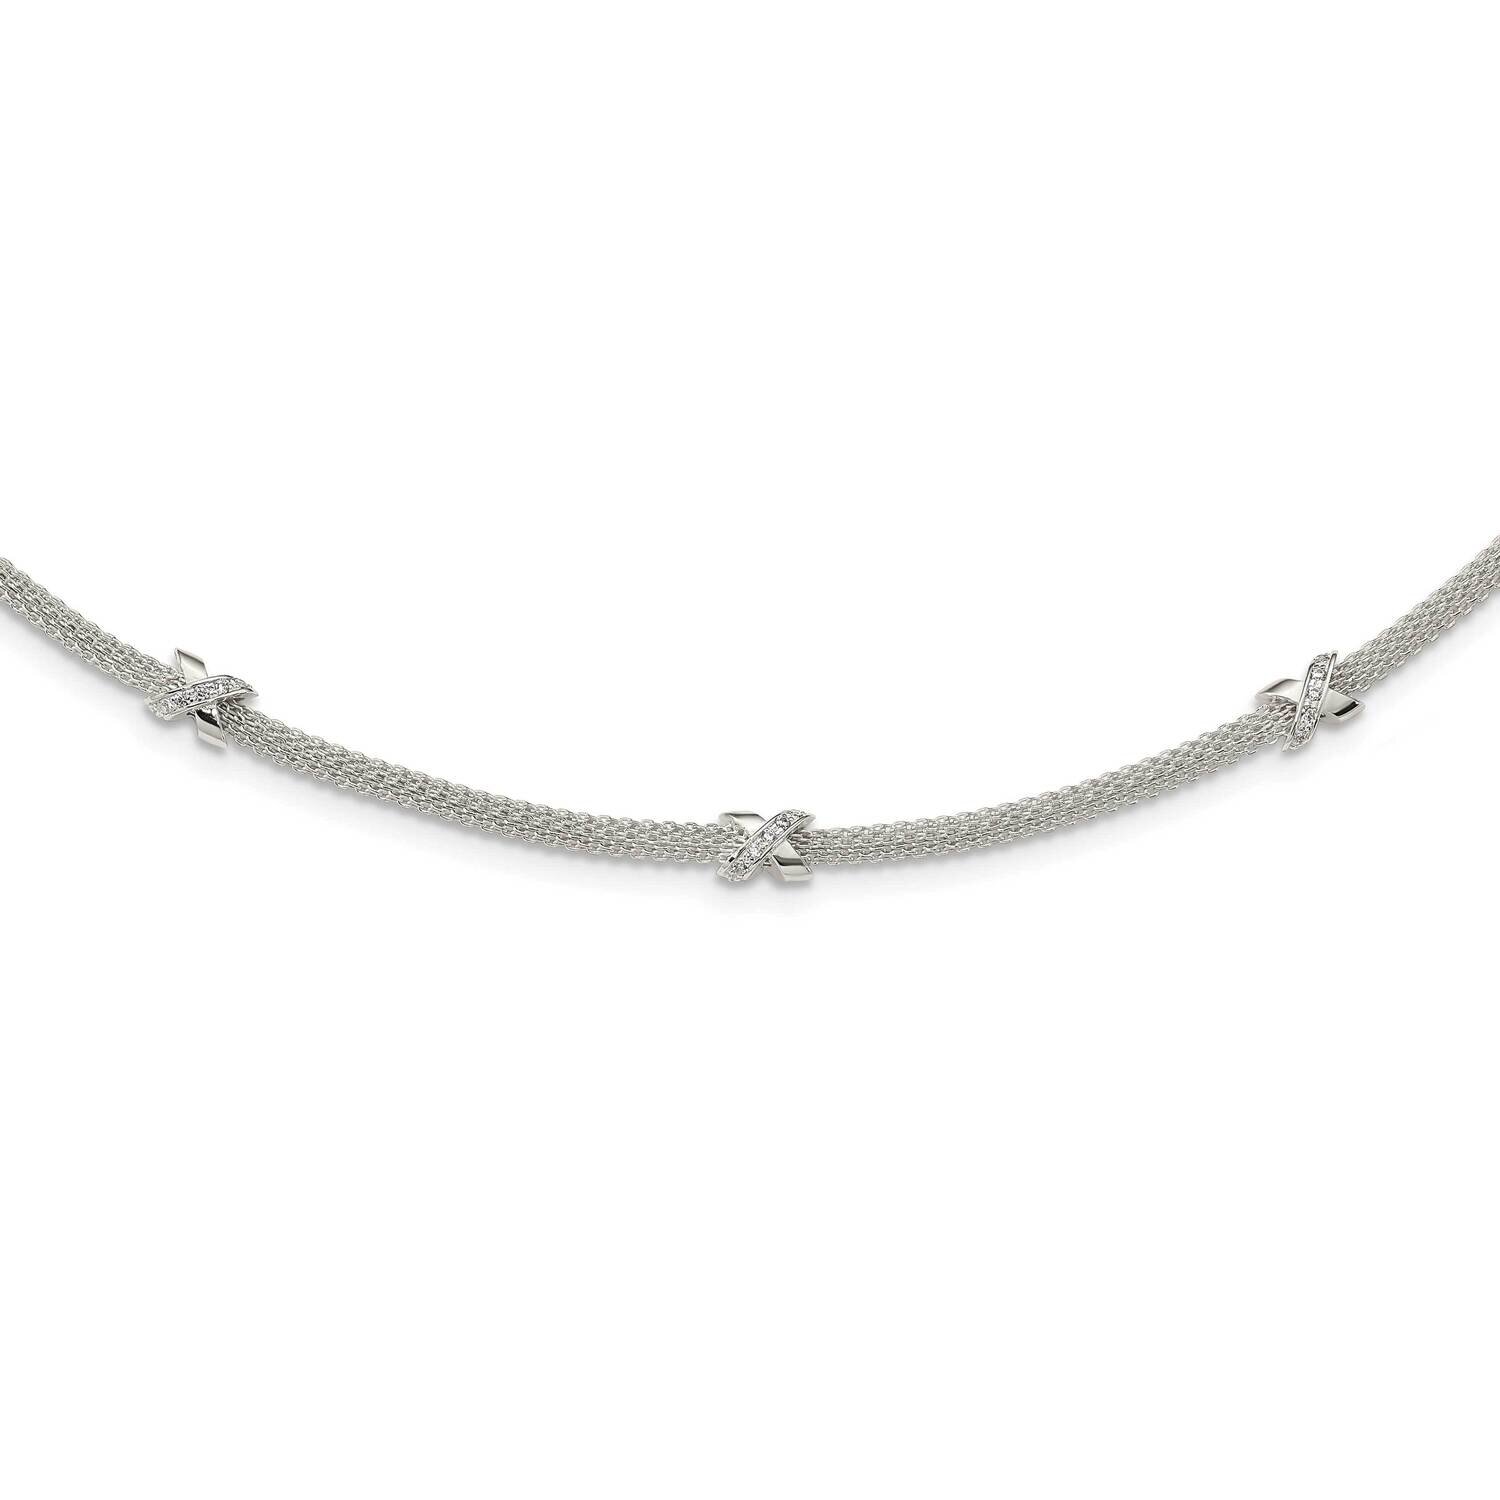 CZ Diamond xs with 2 Inch Extender Necklace 17.5 Inch Sterling Silver Polished QG5996-17.5